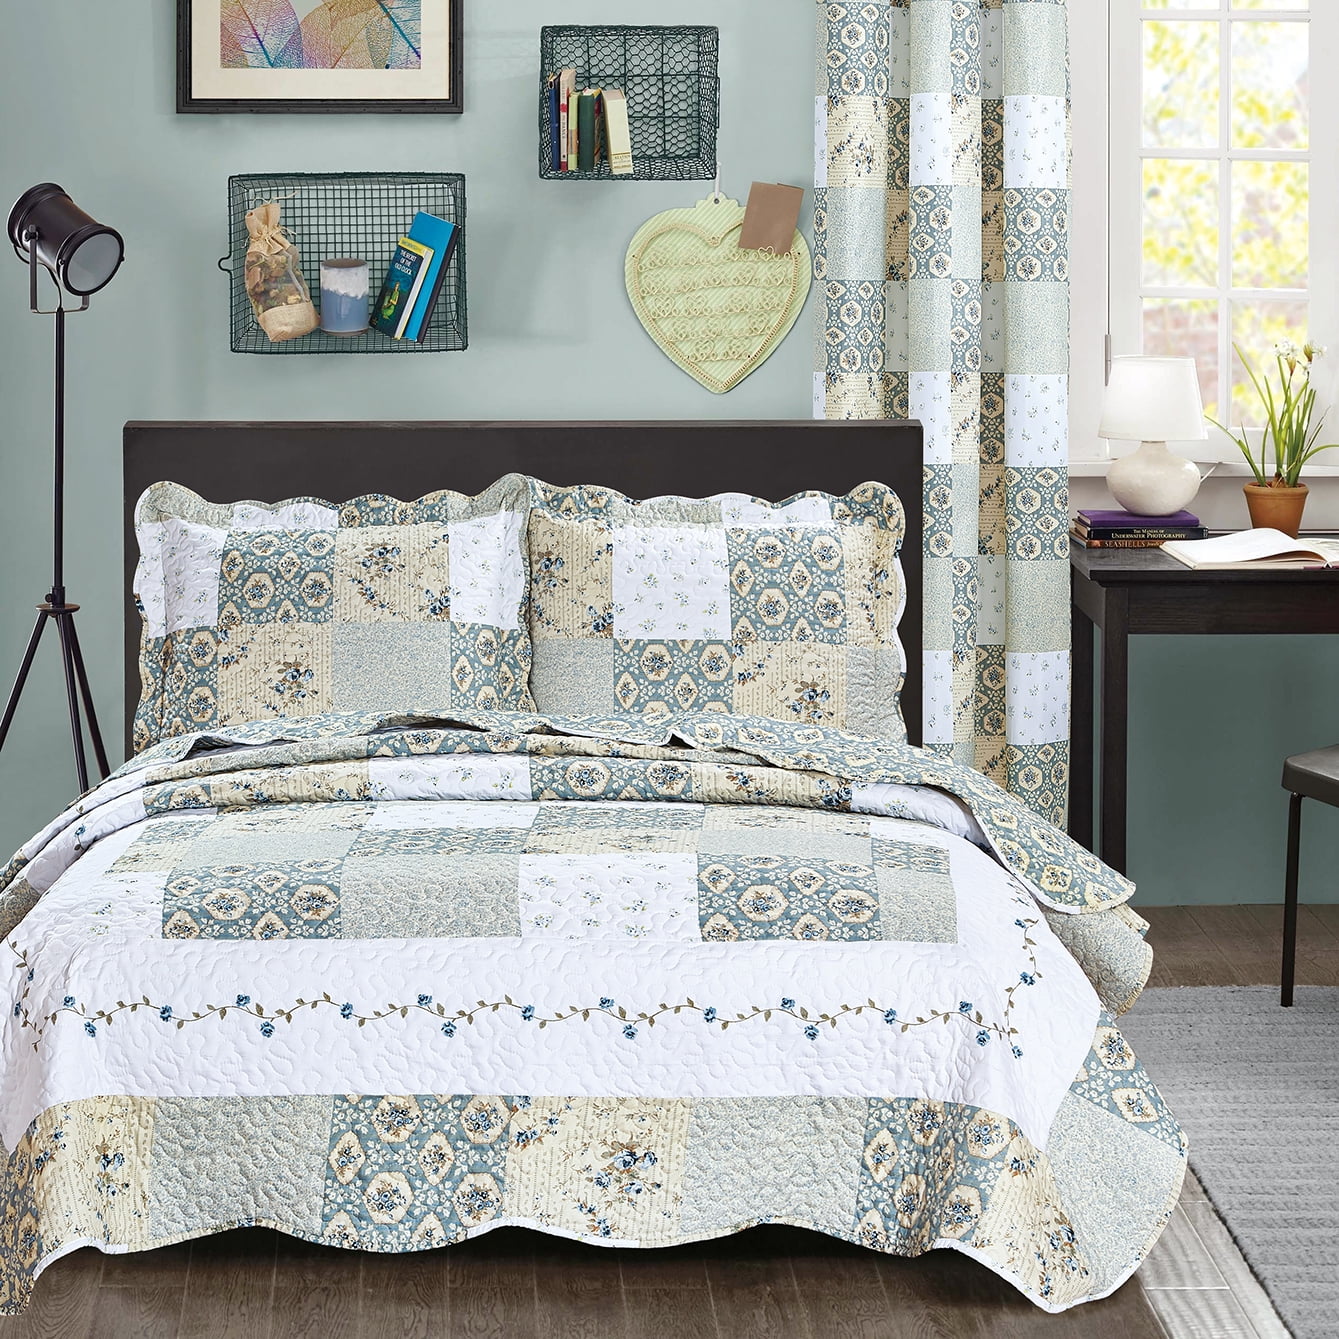 Details about   NEWLAKE Bedspread Quilt Set with Real Stitched Embroidery Floral Paisley Grid P 